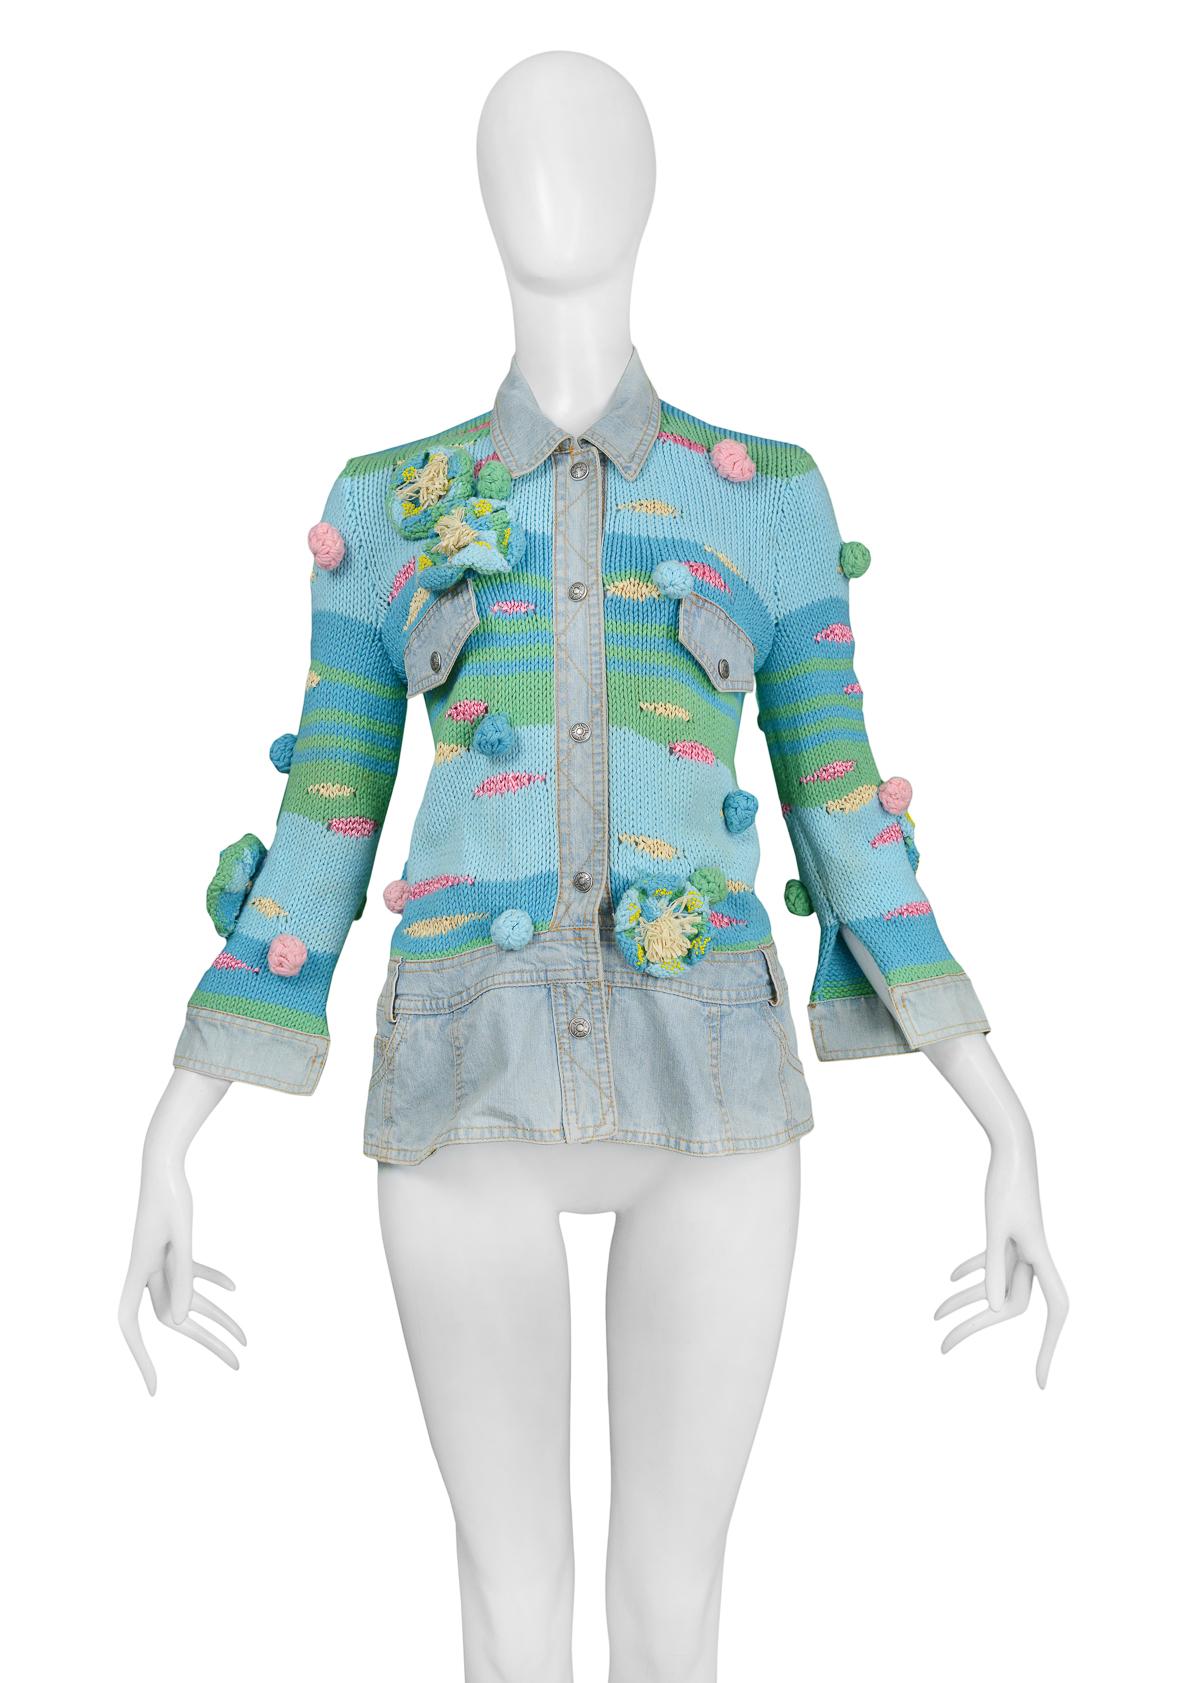 Resurrection Vintage is excited to offer a vintage Christian Dior by John Galliano green & blue knit jacket featuring denim details, raffia floral appliqués and button center front closure.

Christian Dior
Designed By John Galliano 
Size 38
Bust